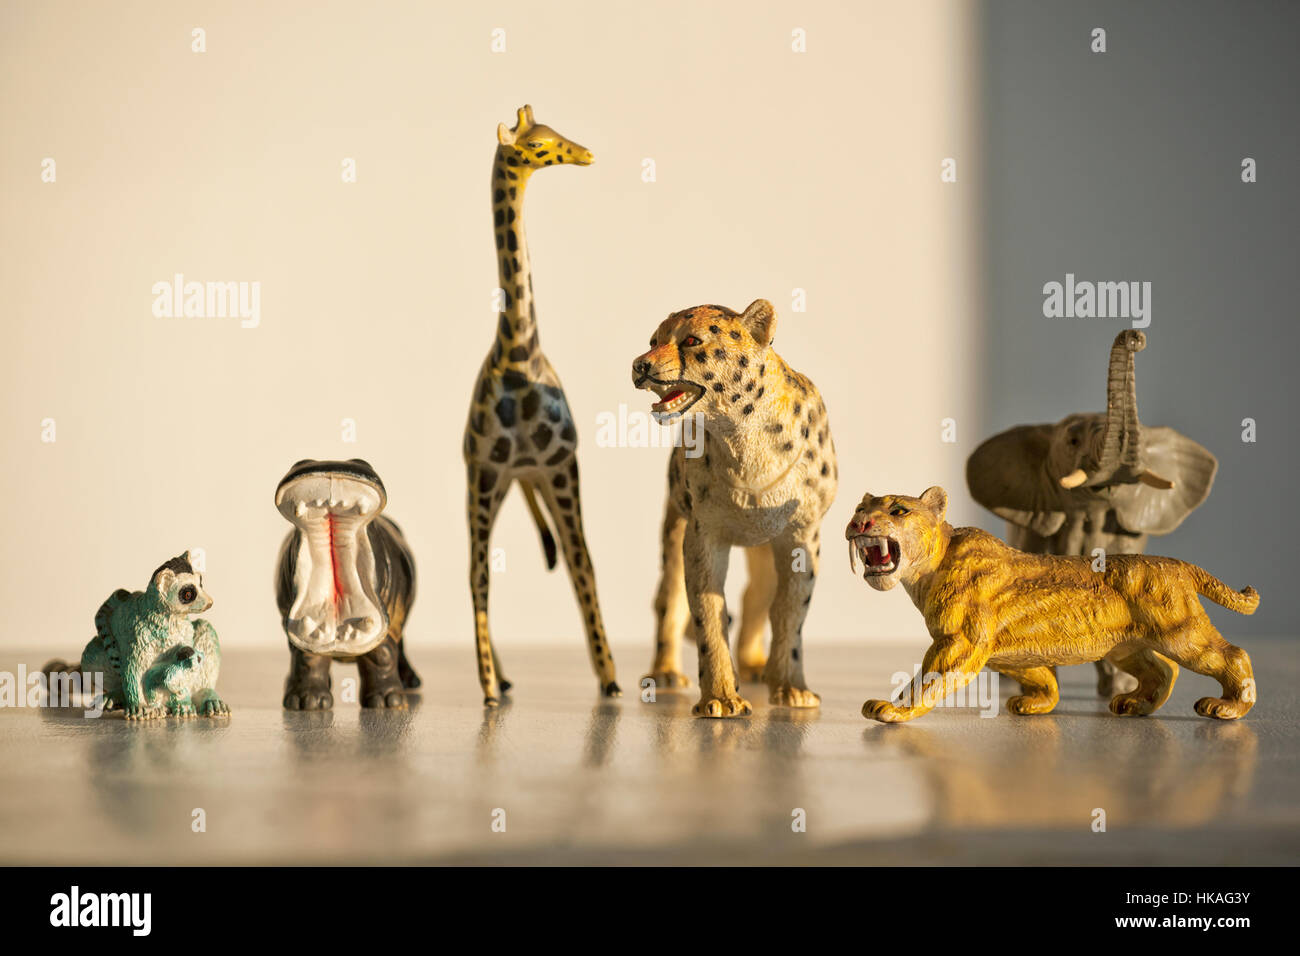 Assorted model animals on a table Stock Photo